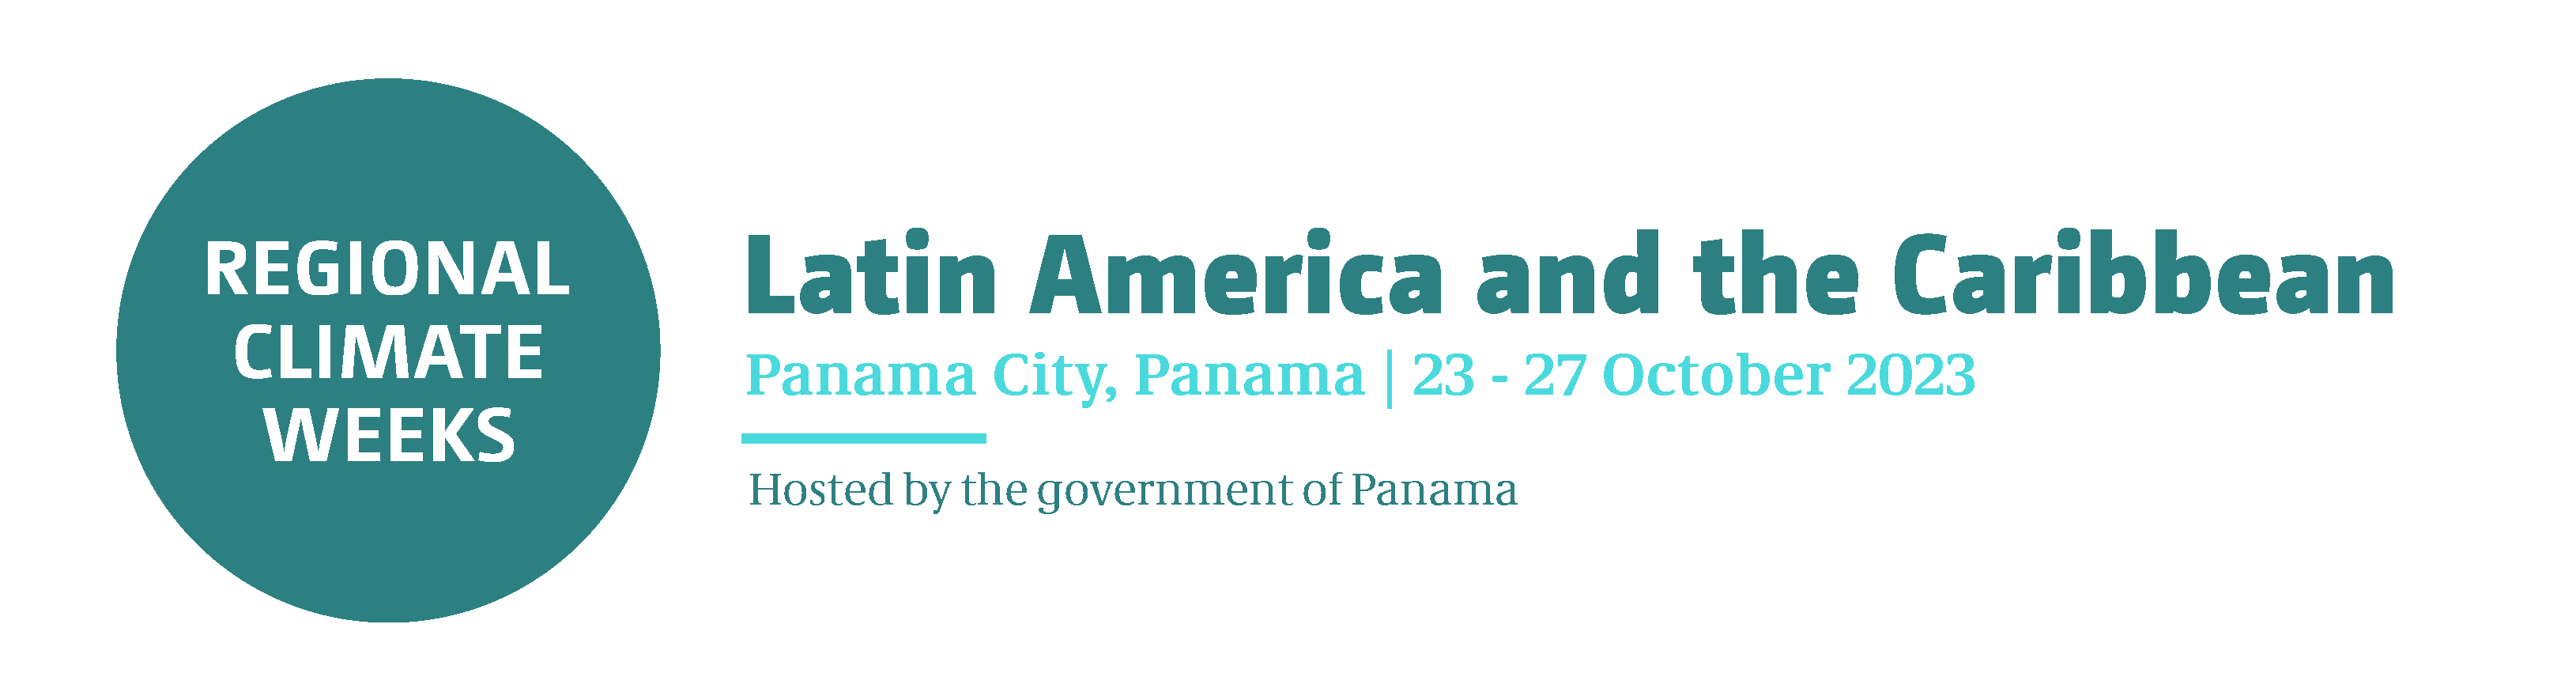 Latin America and the Caribbean Climate Week (LACCW) 2023 (2327